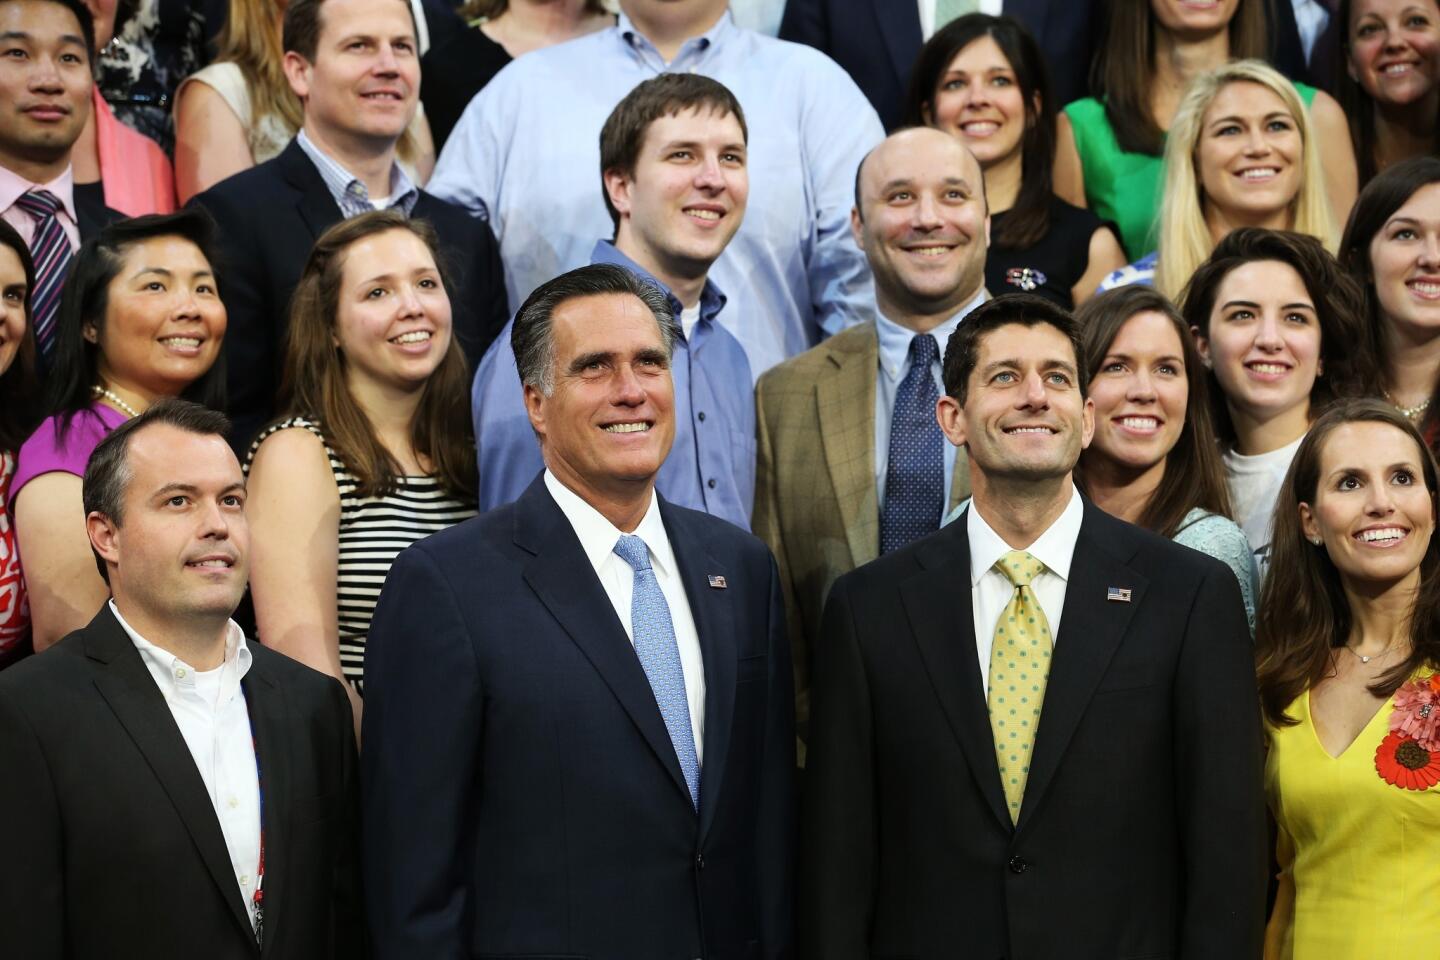 Republican presidential candidate Mitt Romney and vice presidential candidate Paul Ryan pose with campaign staffers during the final day of the Republican National Convention in Tampa, Fla.